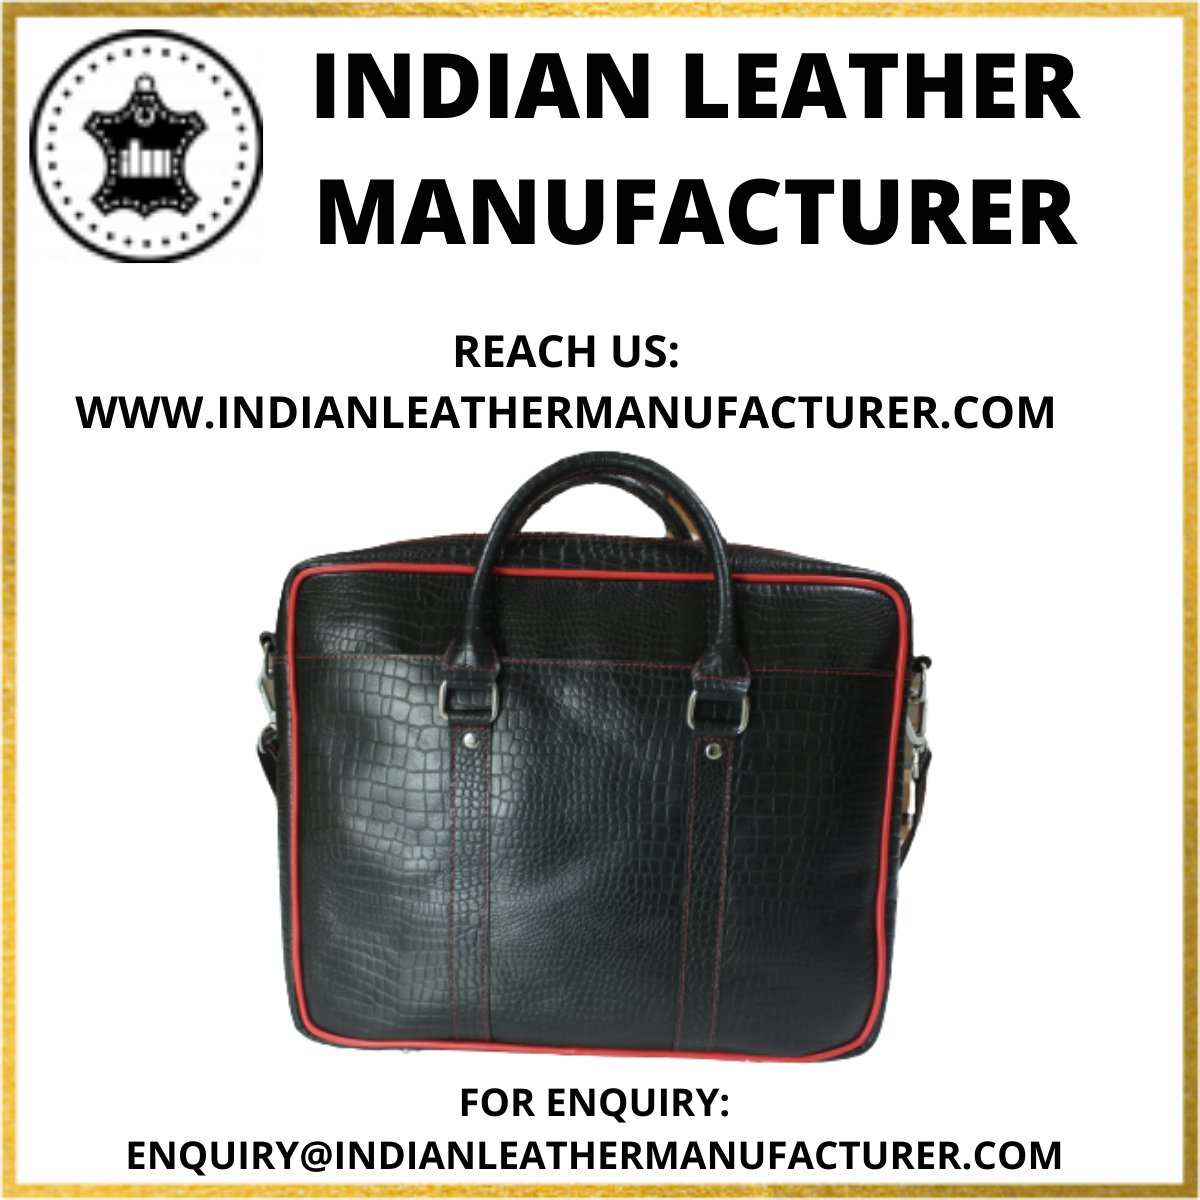 100% Leather LAPTOP CROCO BAG by Indian Leather Manufacturer

Accepting Bulk and Custom Order from all counties
INDIAN LEATHER MANUFACTURER 
#leathergoods #leatherbag  #leather  #buyleather #bulkleatherorder #indianleathermanufacturer #ilm #leathercraft  #leathermanufacturer